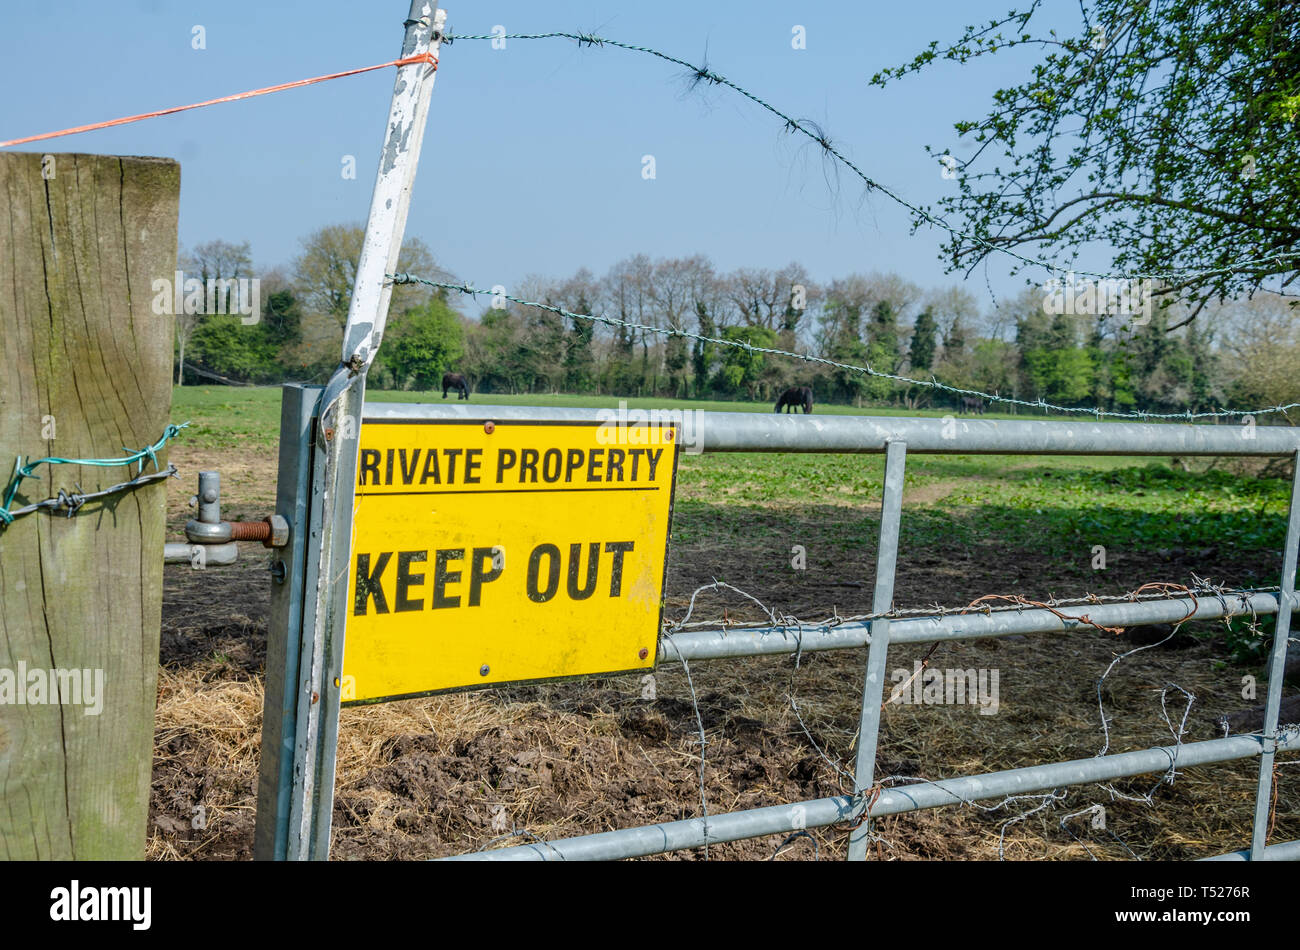 A yellow sign instructing visitors to keep out of private property is attached to a metal gate in South Staffordshire countryside near Perton village. Stock Photo